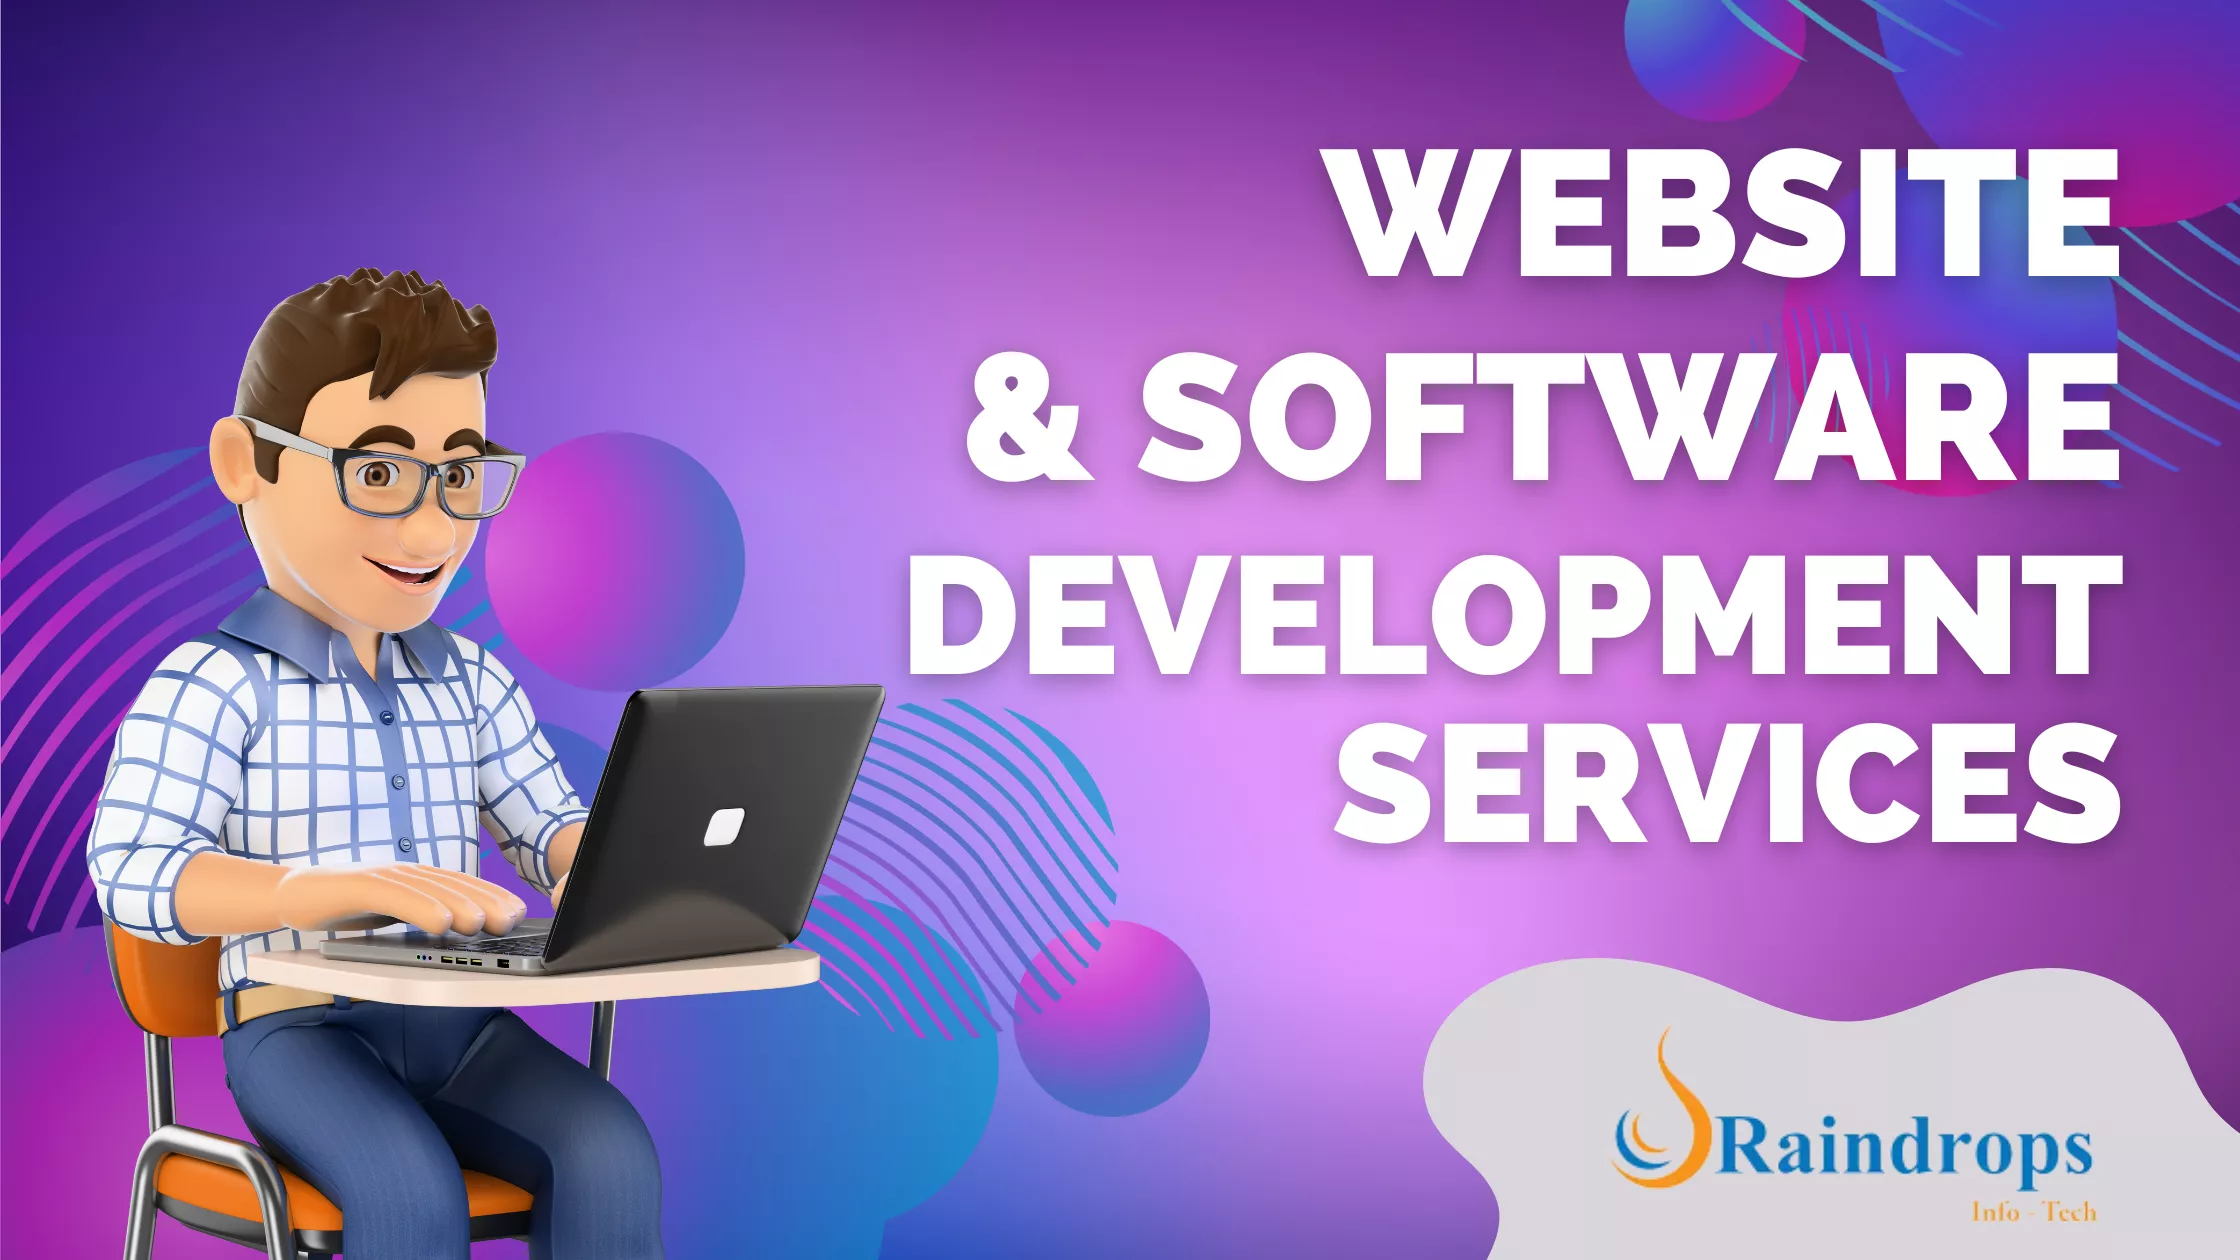 Unleashing Digital Innovation: India’s Finest in Web & Software Development Services